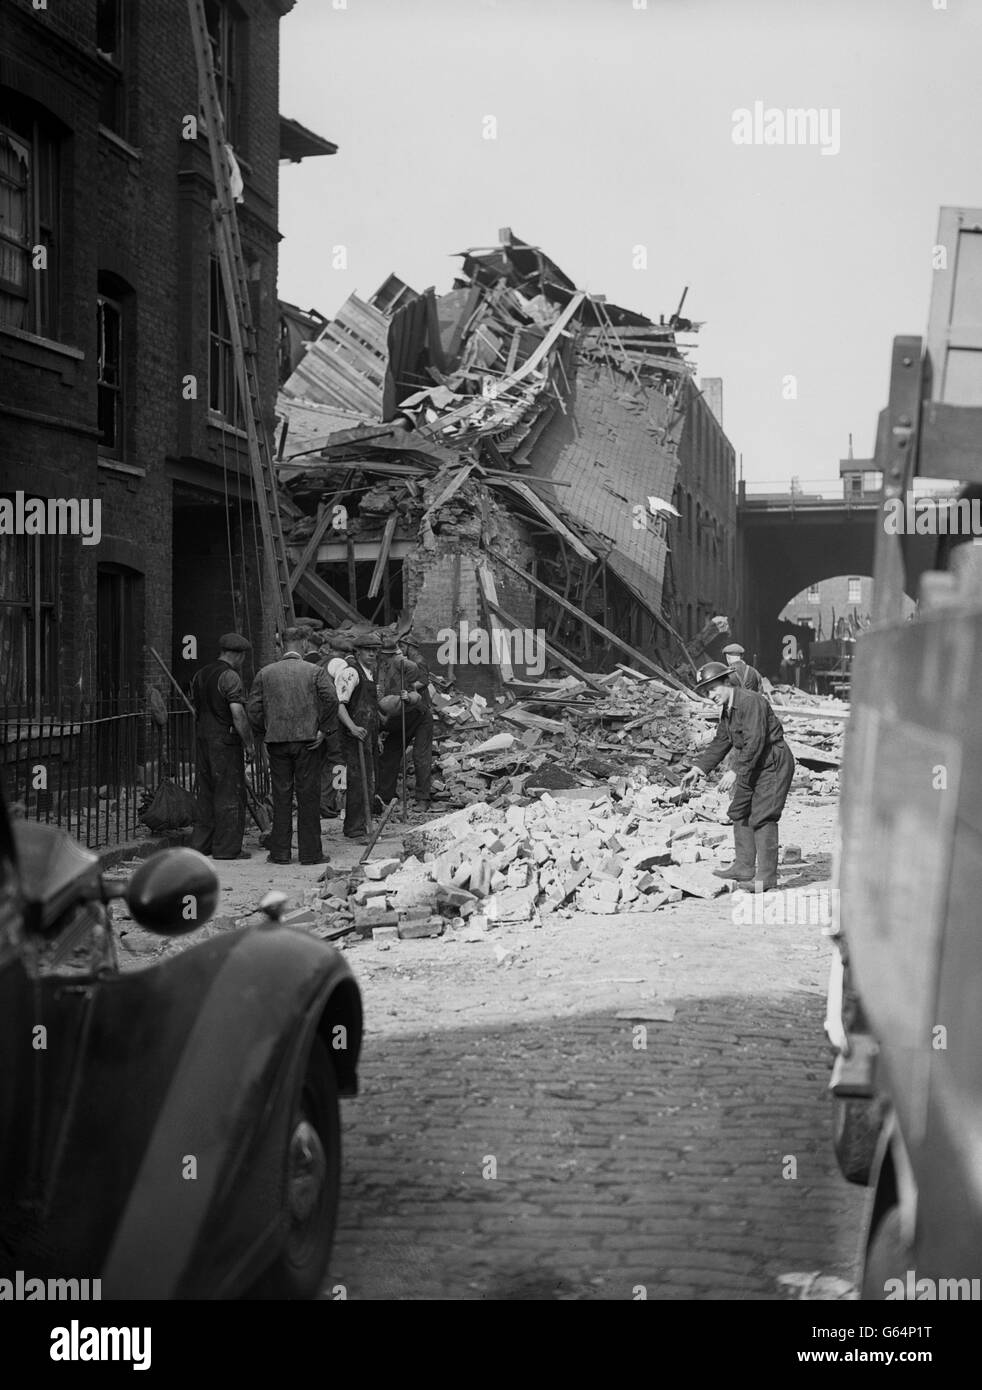 Properties damaged in the blitz over South London, the result of Luftwaffe raids on the capital in 1940. Stock Photo